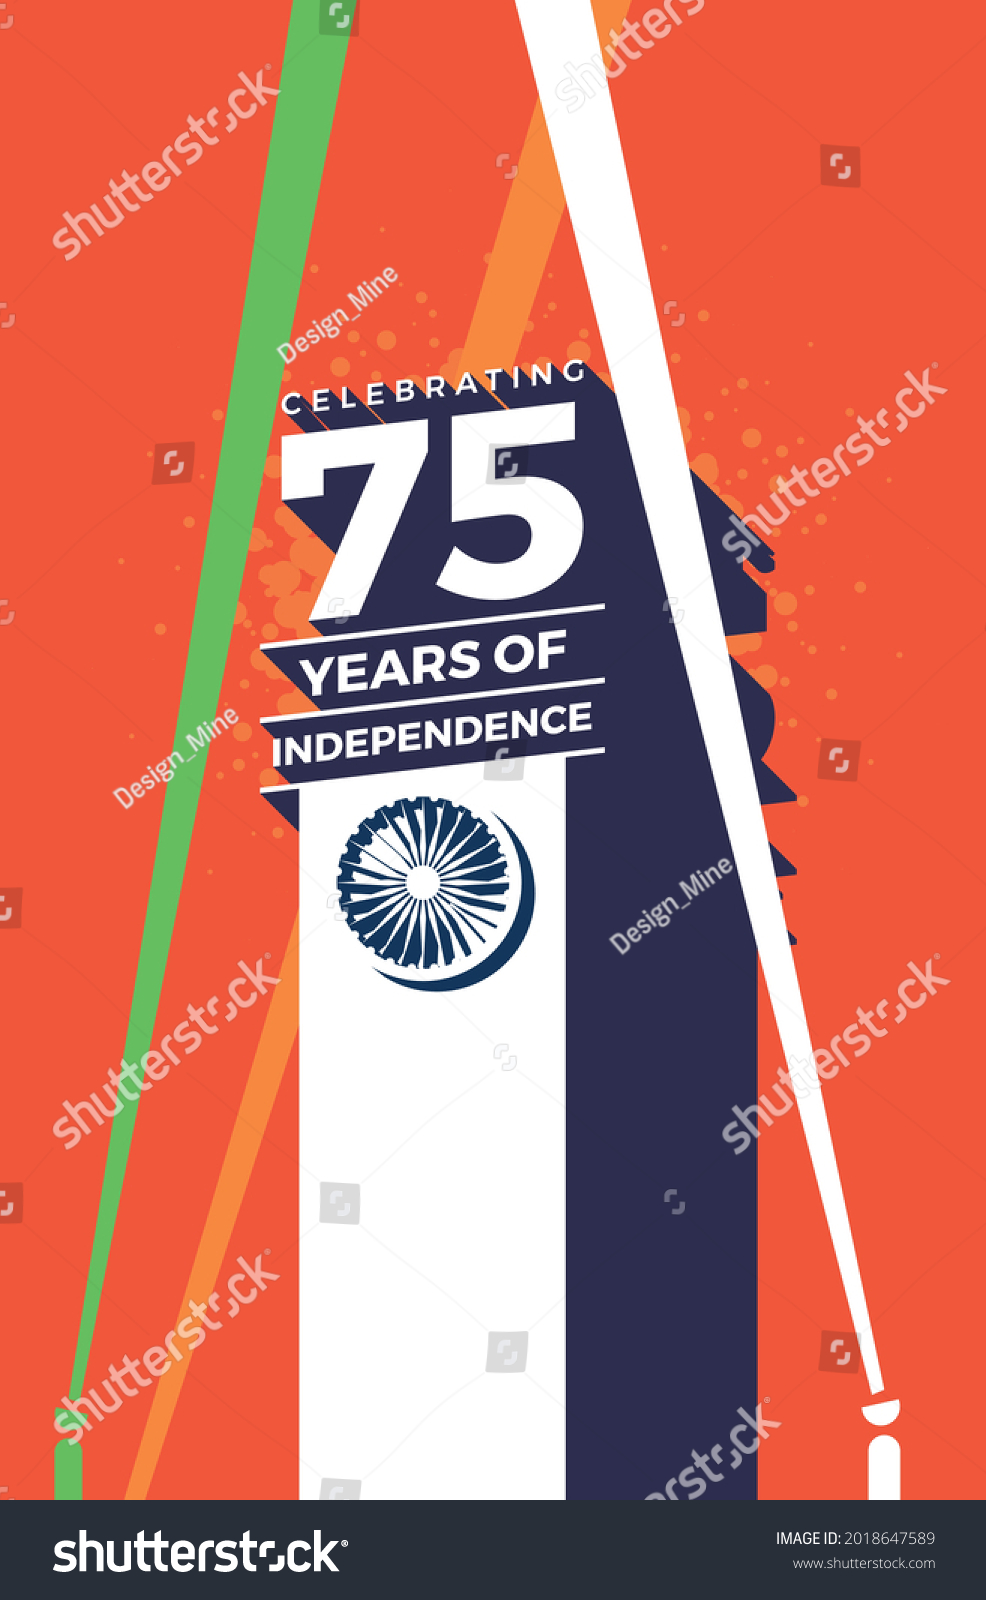 SVG of Celebrating the 75th year of India's Independence. Creative design for posters, banners, advertising, etc. Happy Independence Day. eps10. editable svg